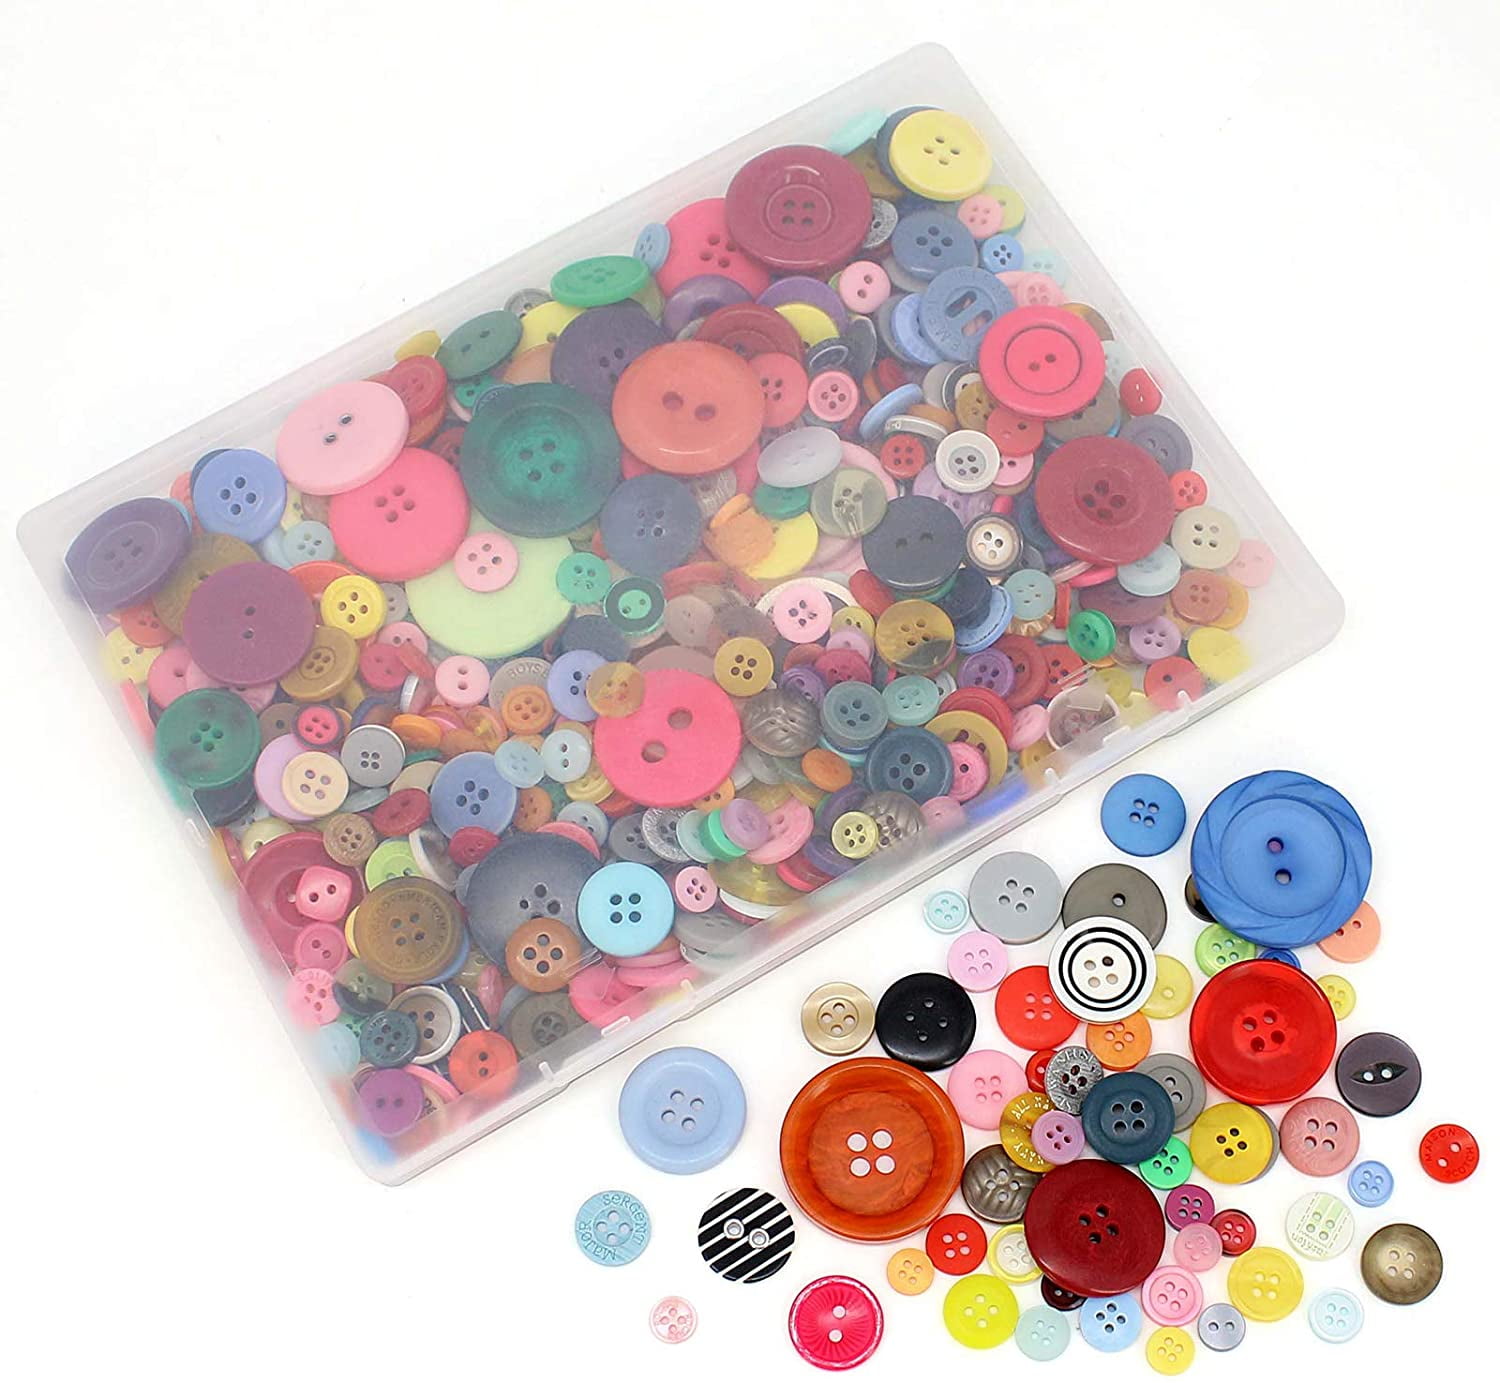 Qeuly Buttons for Crafts, Assorted Sizes Mixed Color Resin Buttons